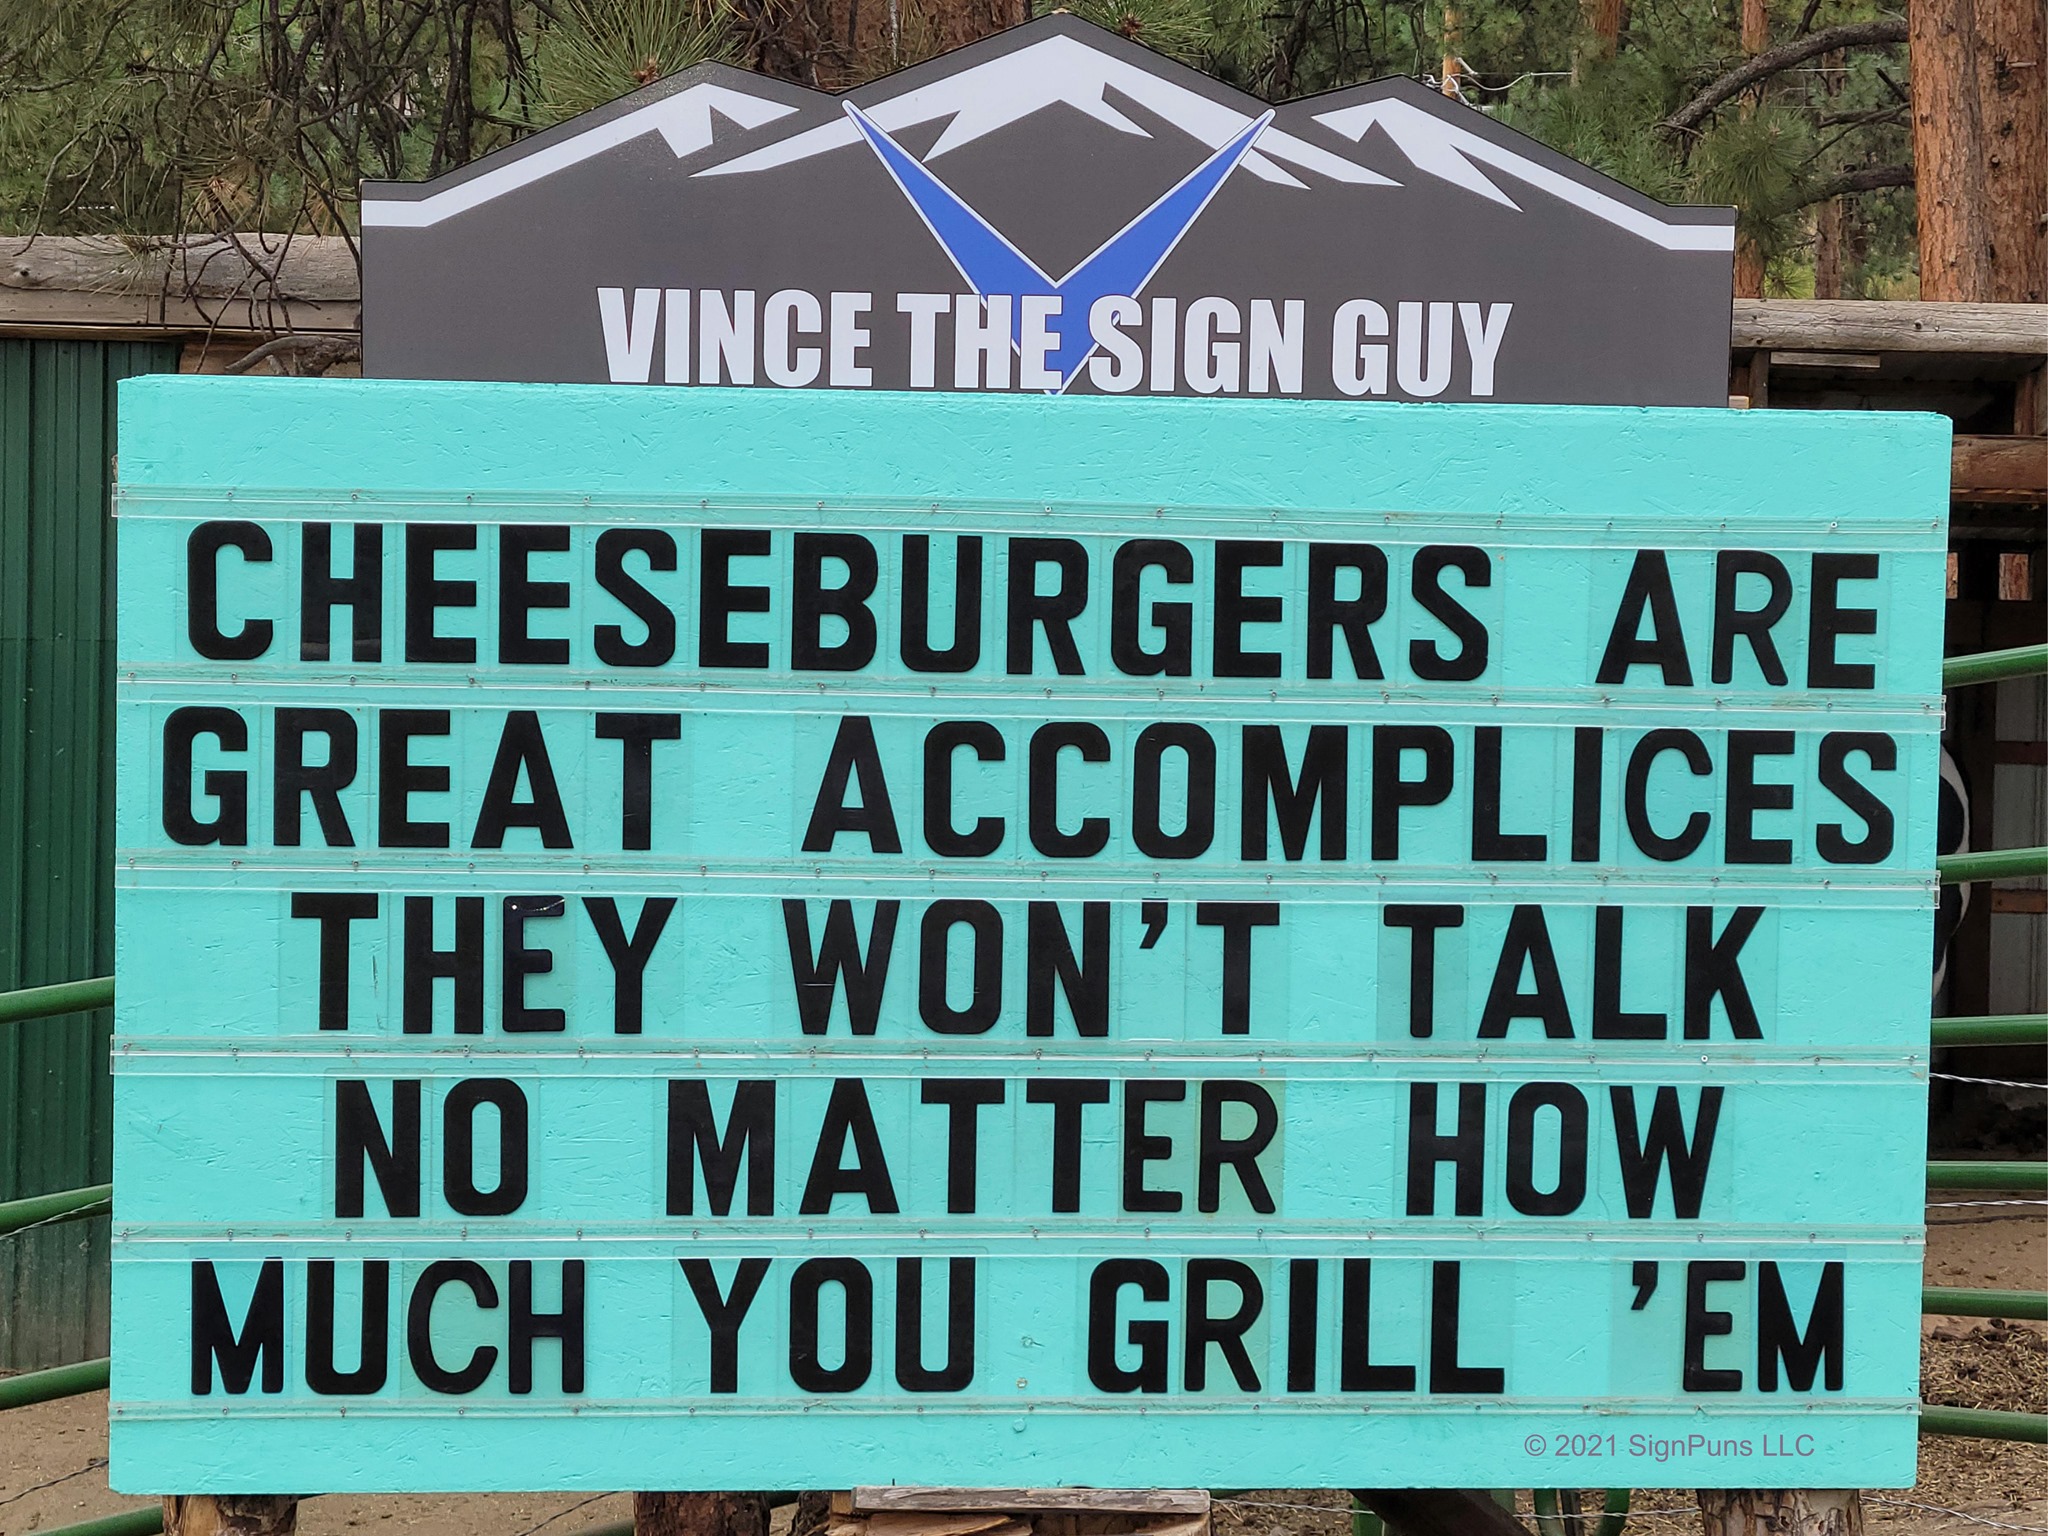 community sign that says: "cheeseburgers are great accomplices they won't talk no matter how much you trill 'em"